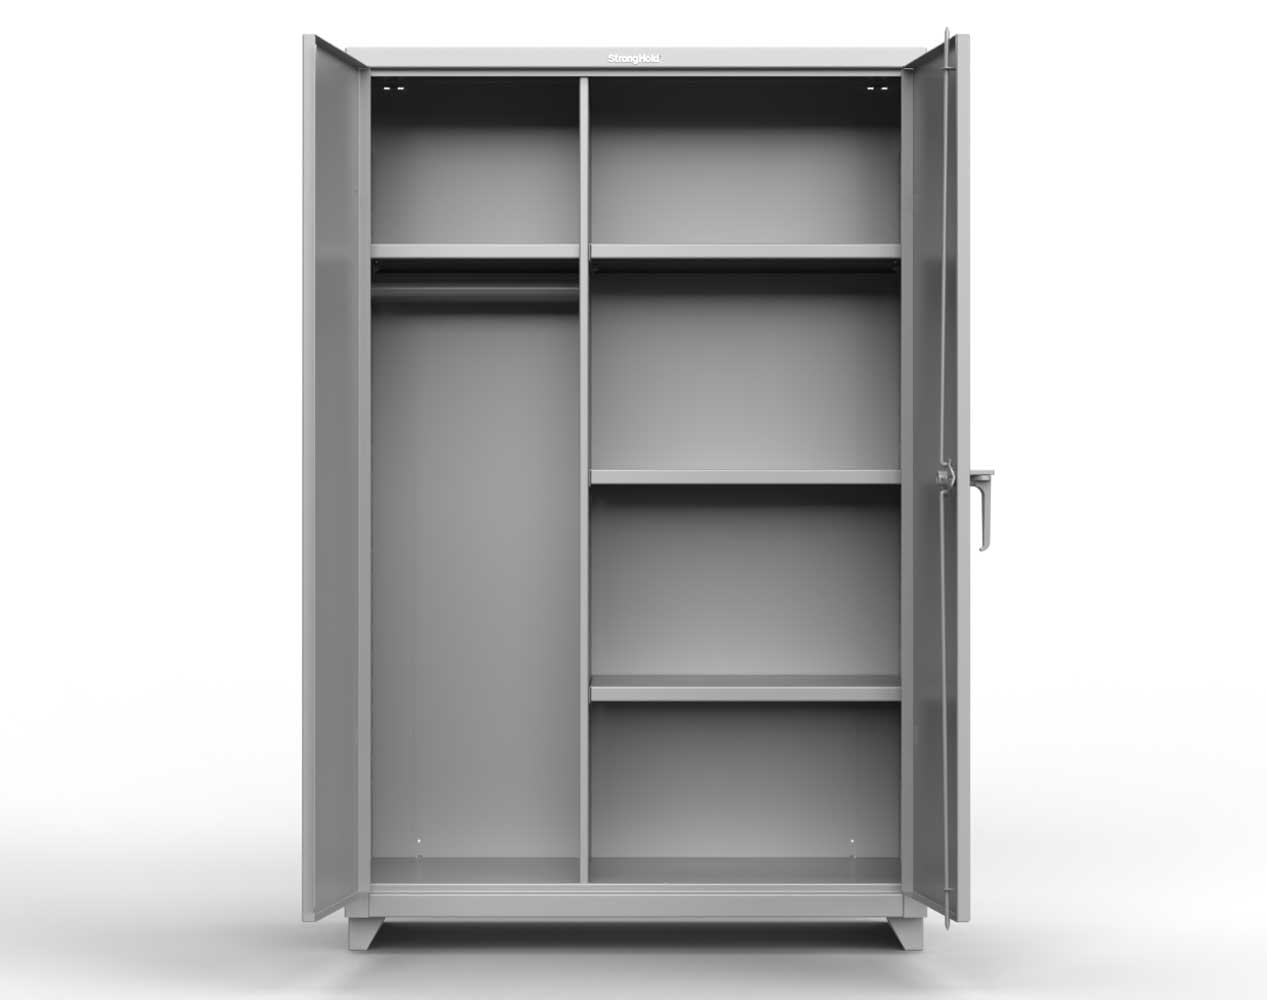 Extra Heavy Duty 14 GA Uniform Cabinet with 5 Shelves - 36 In. W x 24 In. D x 75 In. H